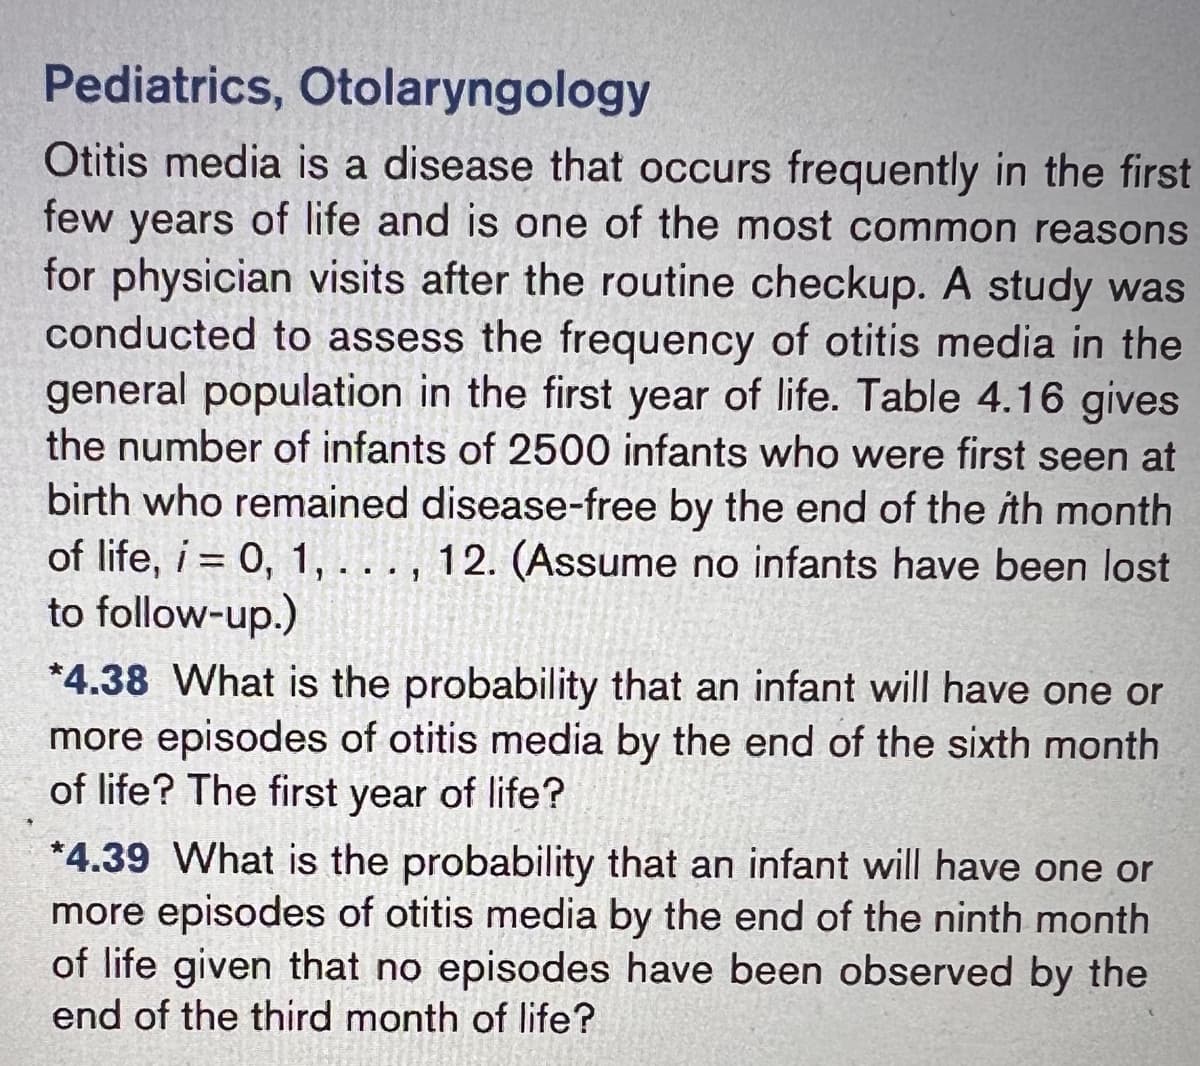 Pediatrics, Otolaryngology
Otitis media is a disease that occurs frequently in the first
few years of life and is one of the most common reasons
for physician visits after the routine checkup. A study was
conducted to assess the frequency of otitis media in the
general population in the first year of life. Table 4.16 gives
the number of infants of 2500 infants who were first seen at
birth who remained disease-free by the end of the ith month
of life, i = 0, 1, . . . , 12. (Assume no infants have been lost
to follow-up.)
*4.38 What is the probability that an infant will have one or
more episodes of otitis media by the end of the sixth month
of life? The first year of life?
*4.39 What is the probability that an infant will have one or
more episodes of otitis media by the end of the ninth month
of life given that no episodes have been observed by the
end of the third month of life?